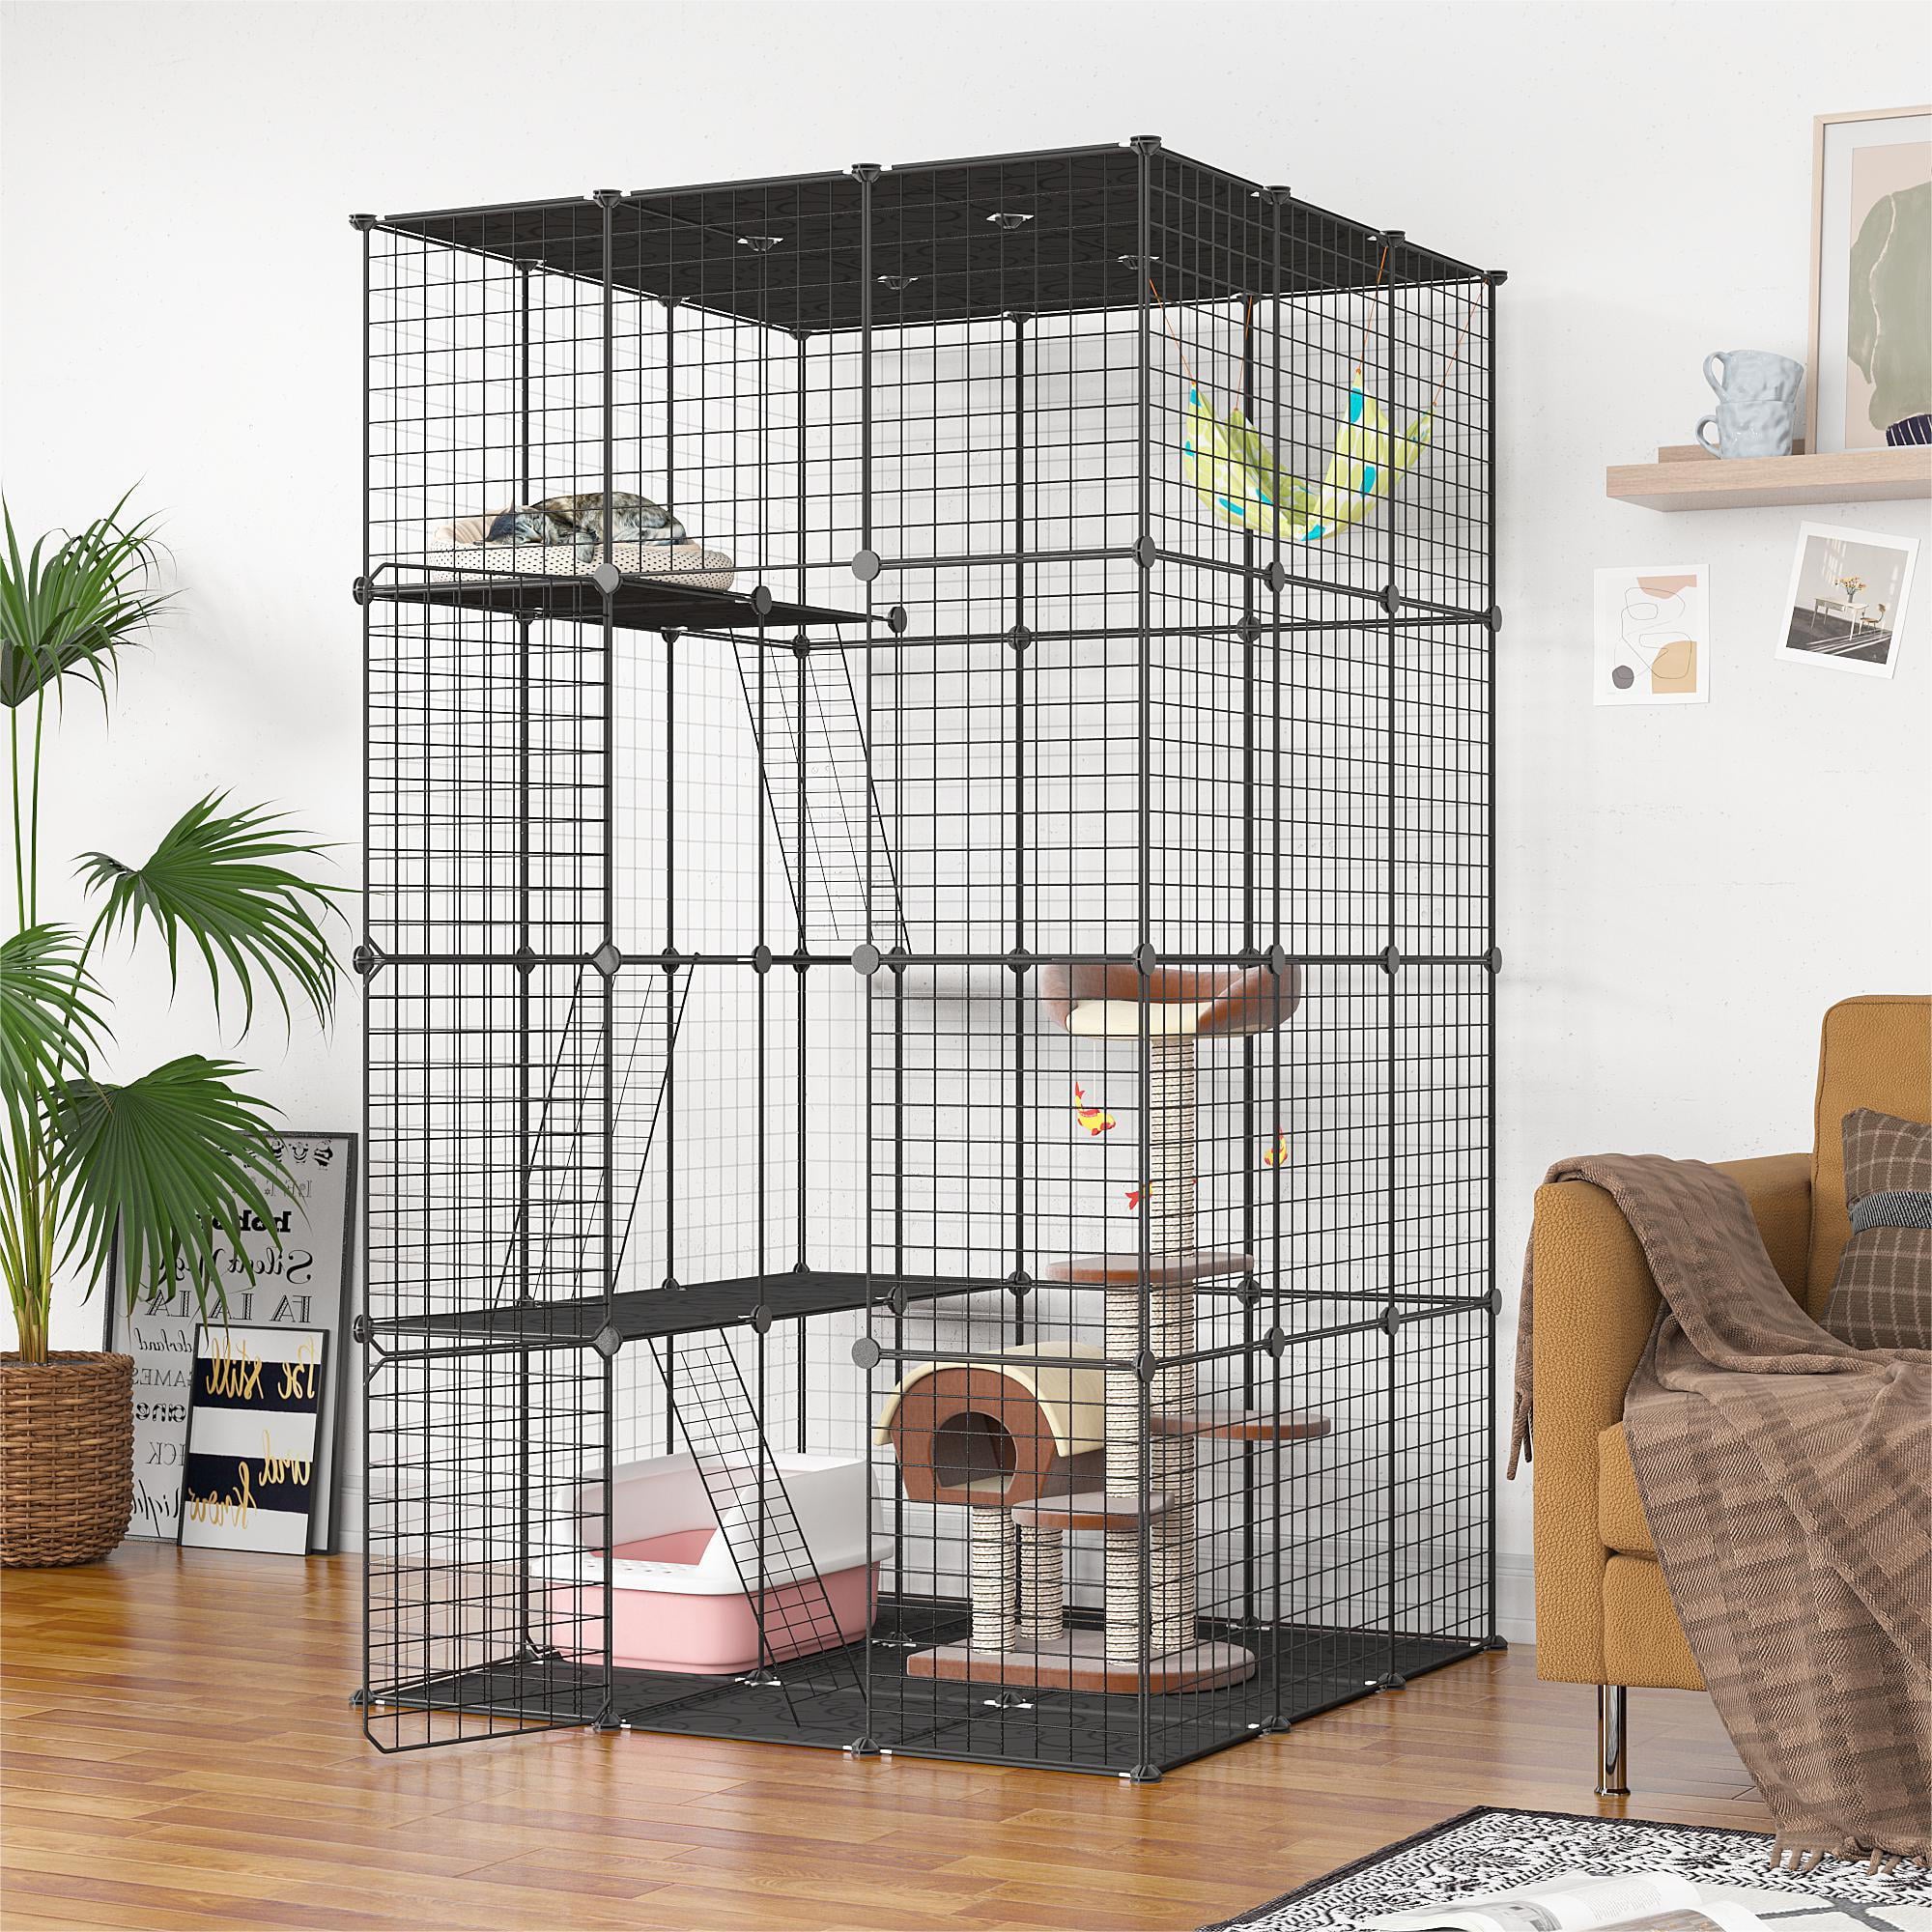 Coziwow Large DIY Cat Cage Playpen Pet Cage for Rabbit Small Animal Indoor， Black